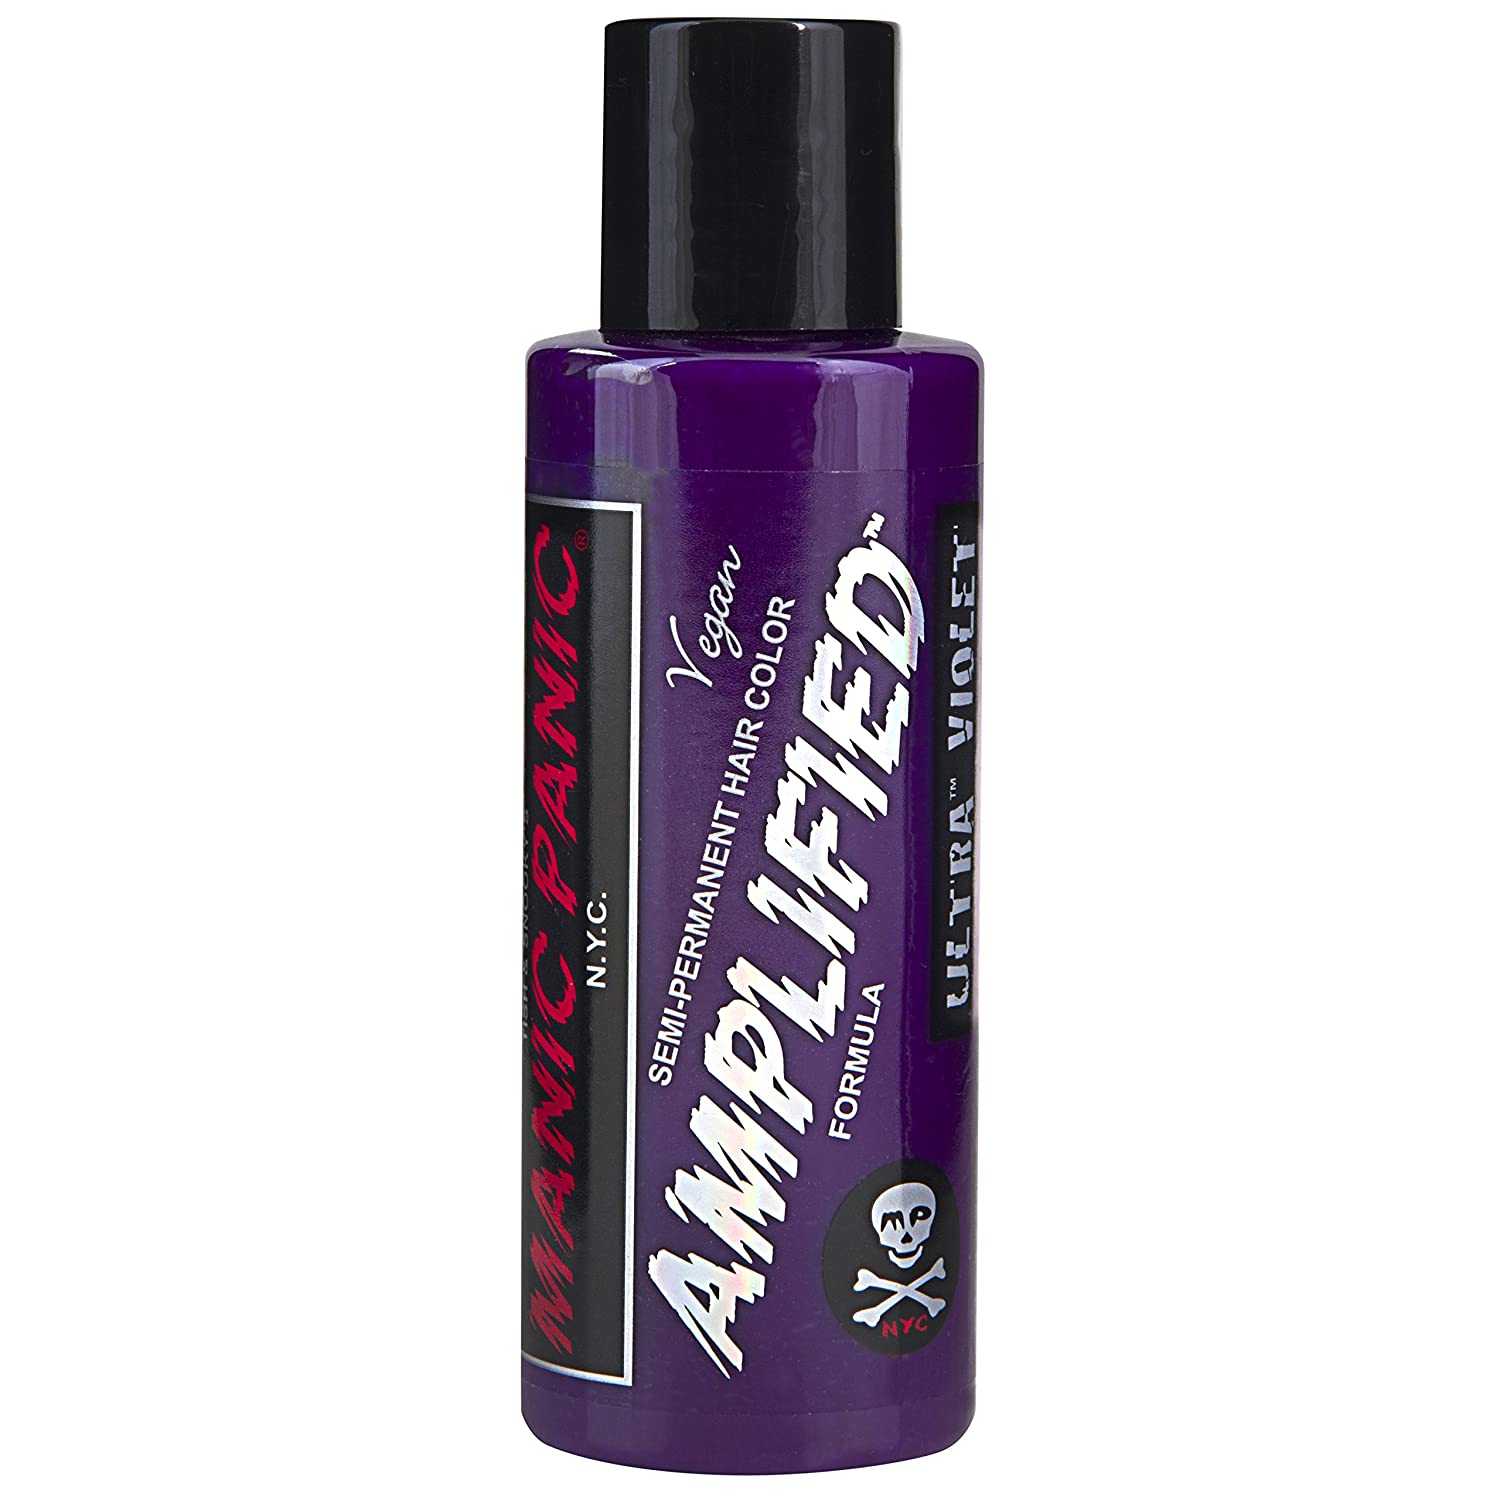 anic Panic Semi-permanent Hair Color Amplified Formula Ultra Violet, 4 Oz - 4th Ave Market